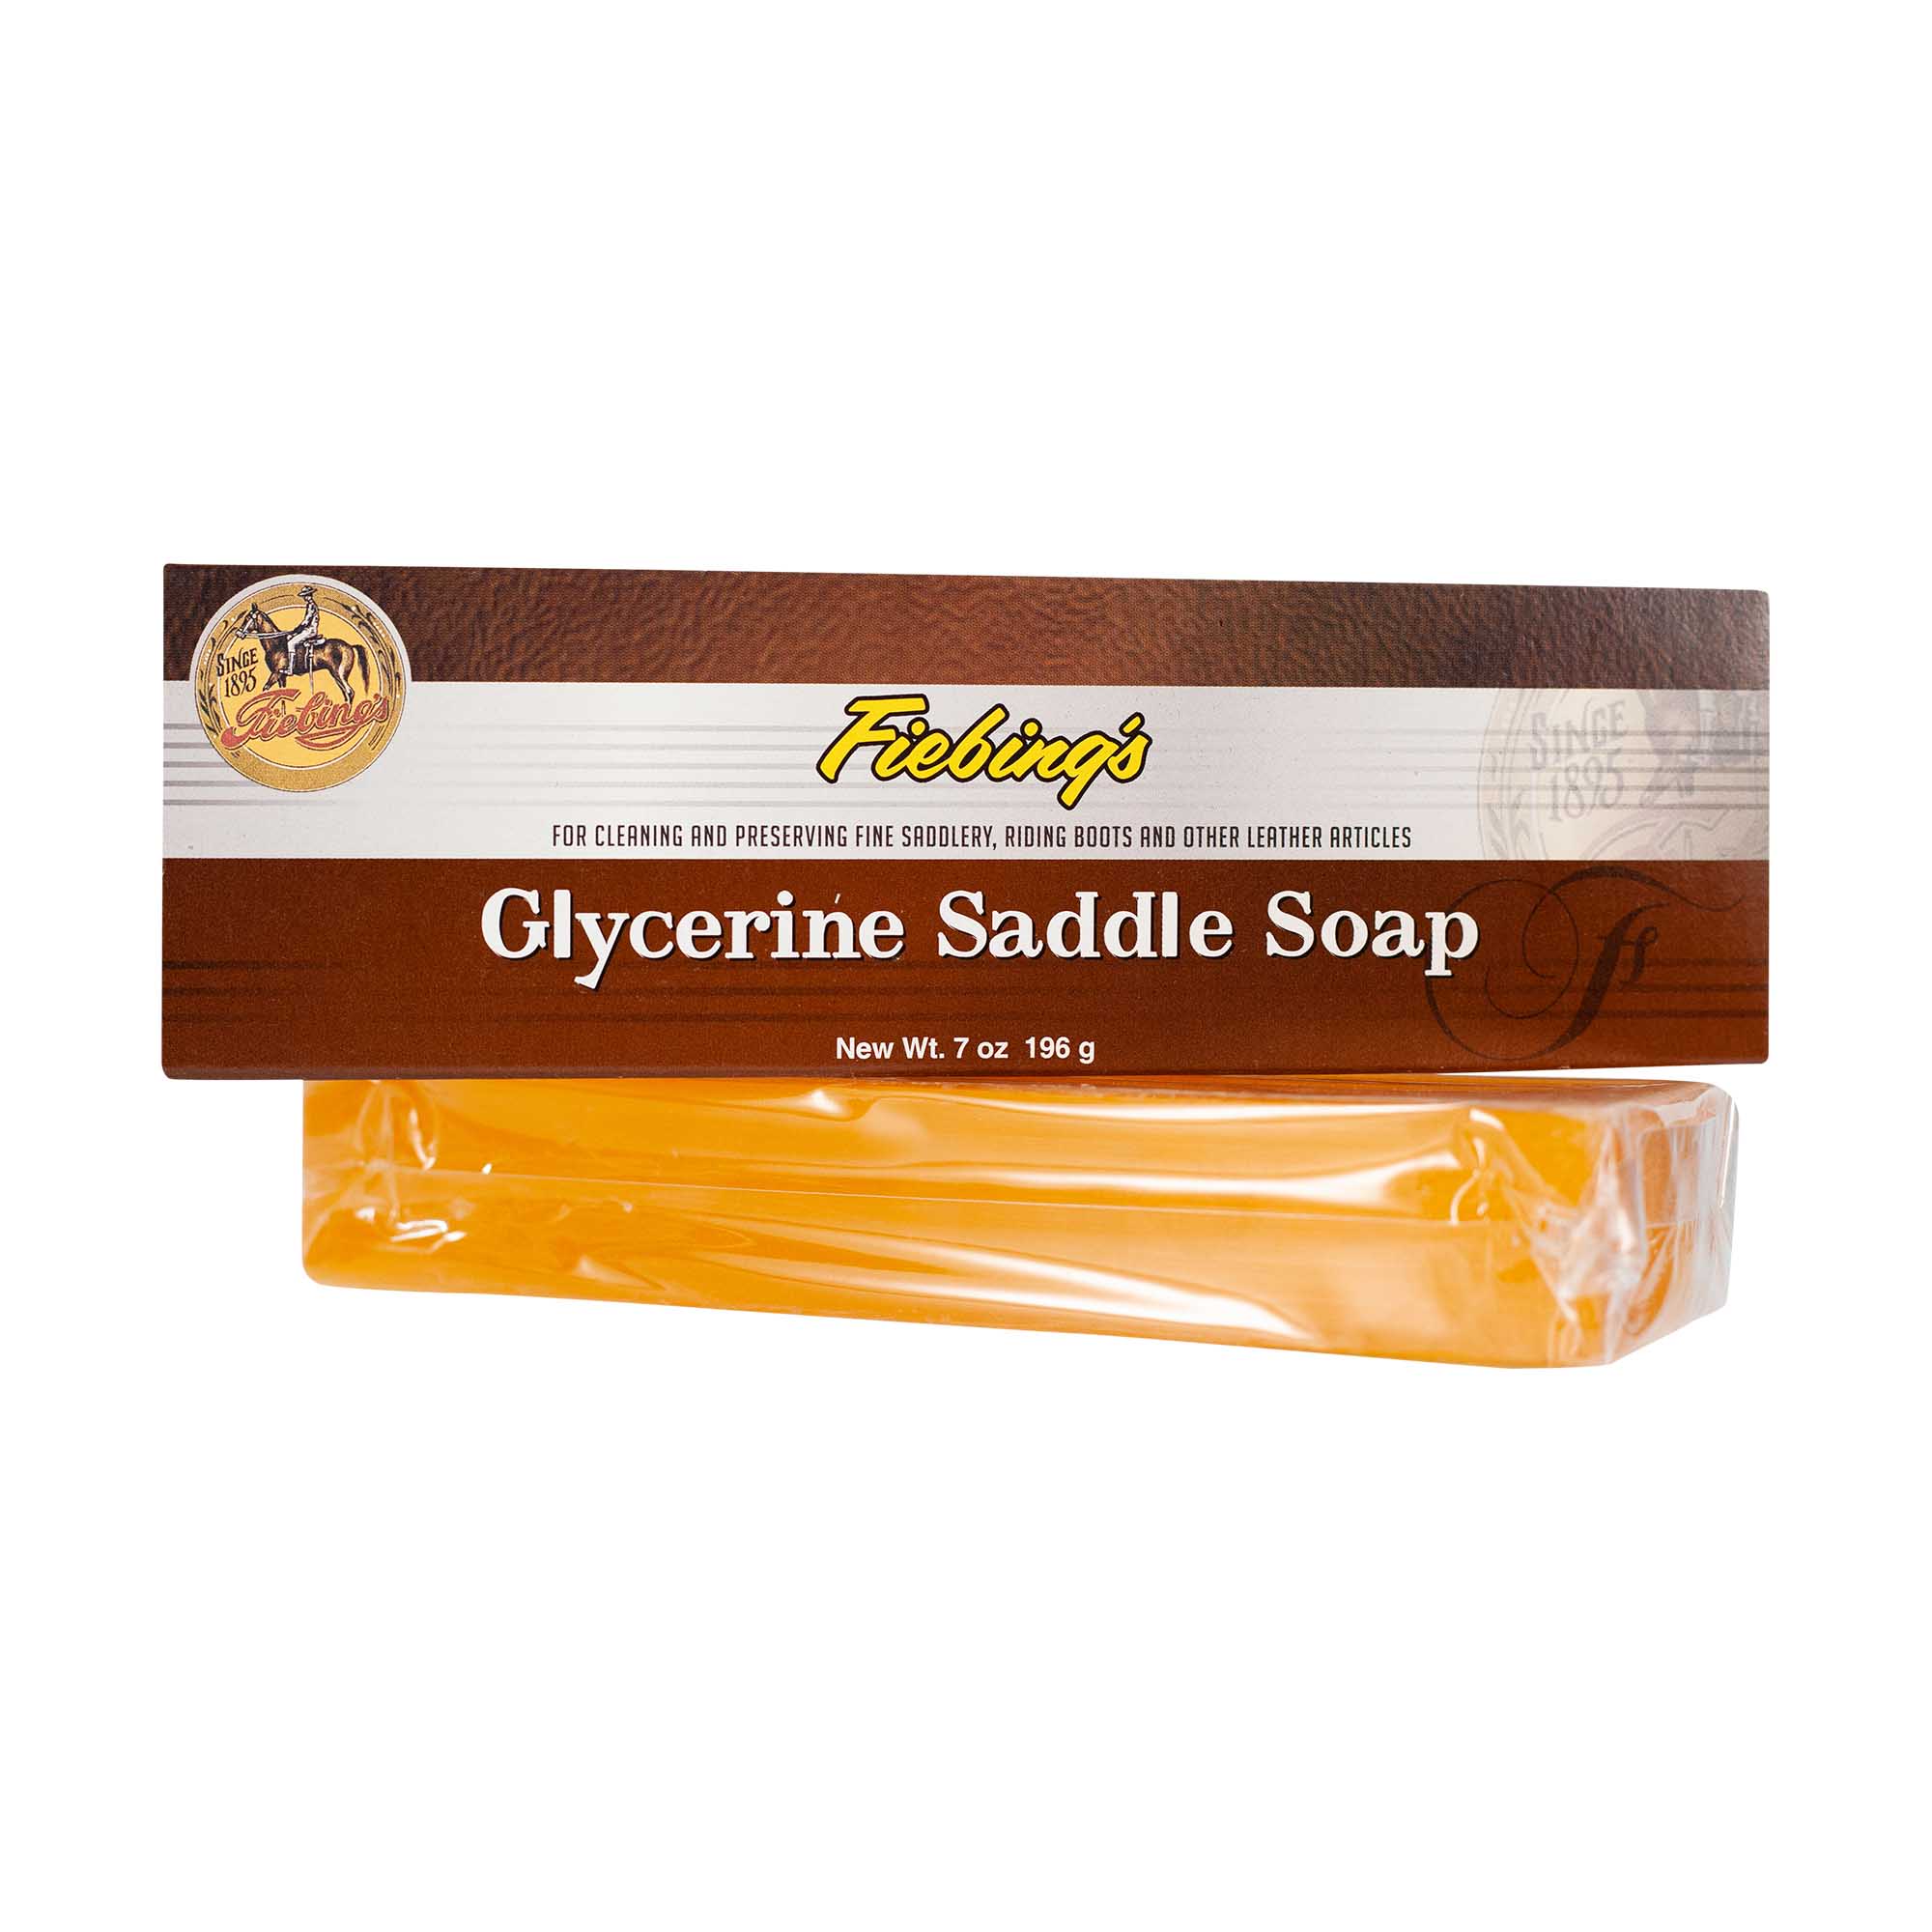 Best saddle soaps and leather conditioners